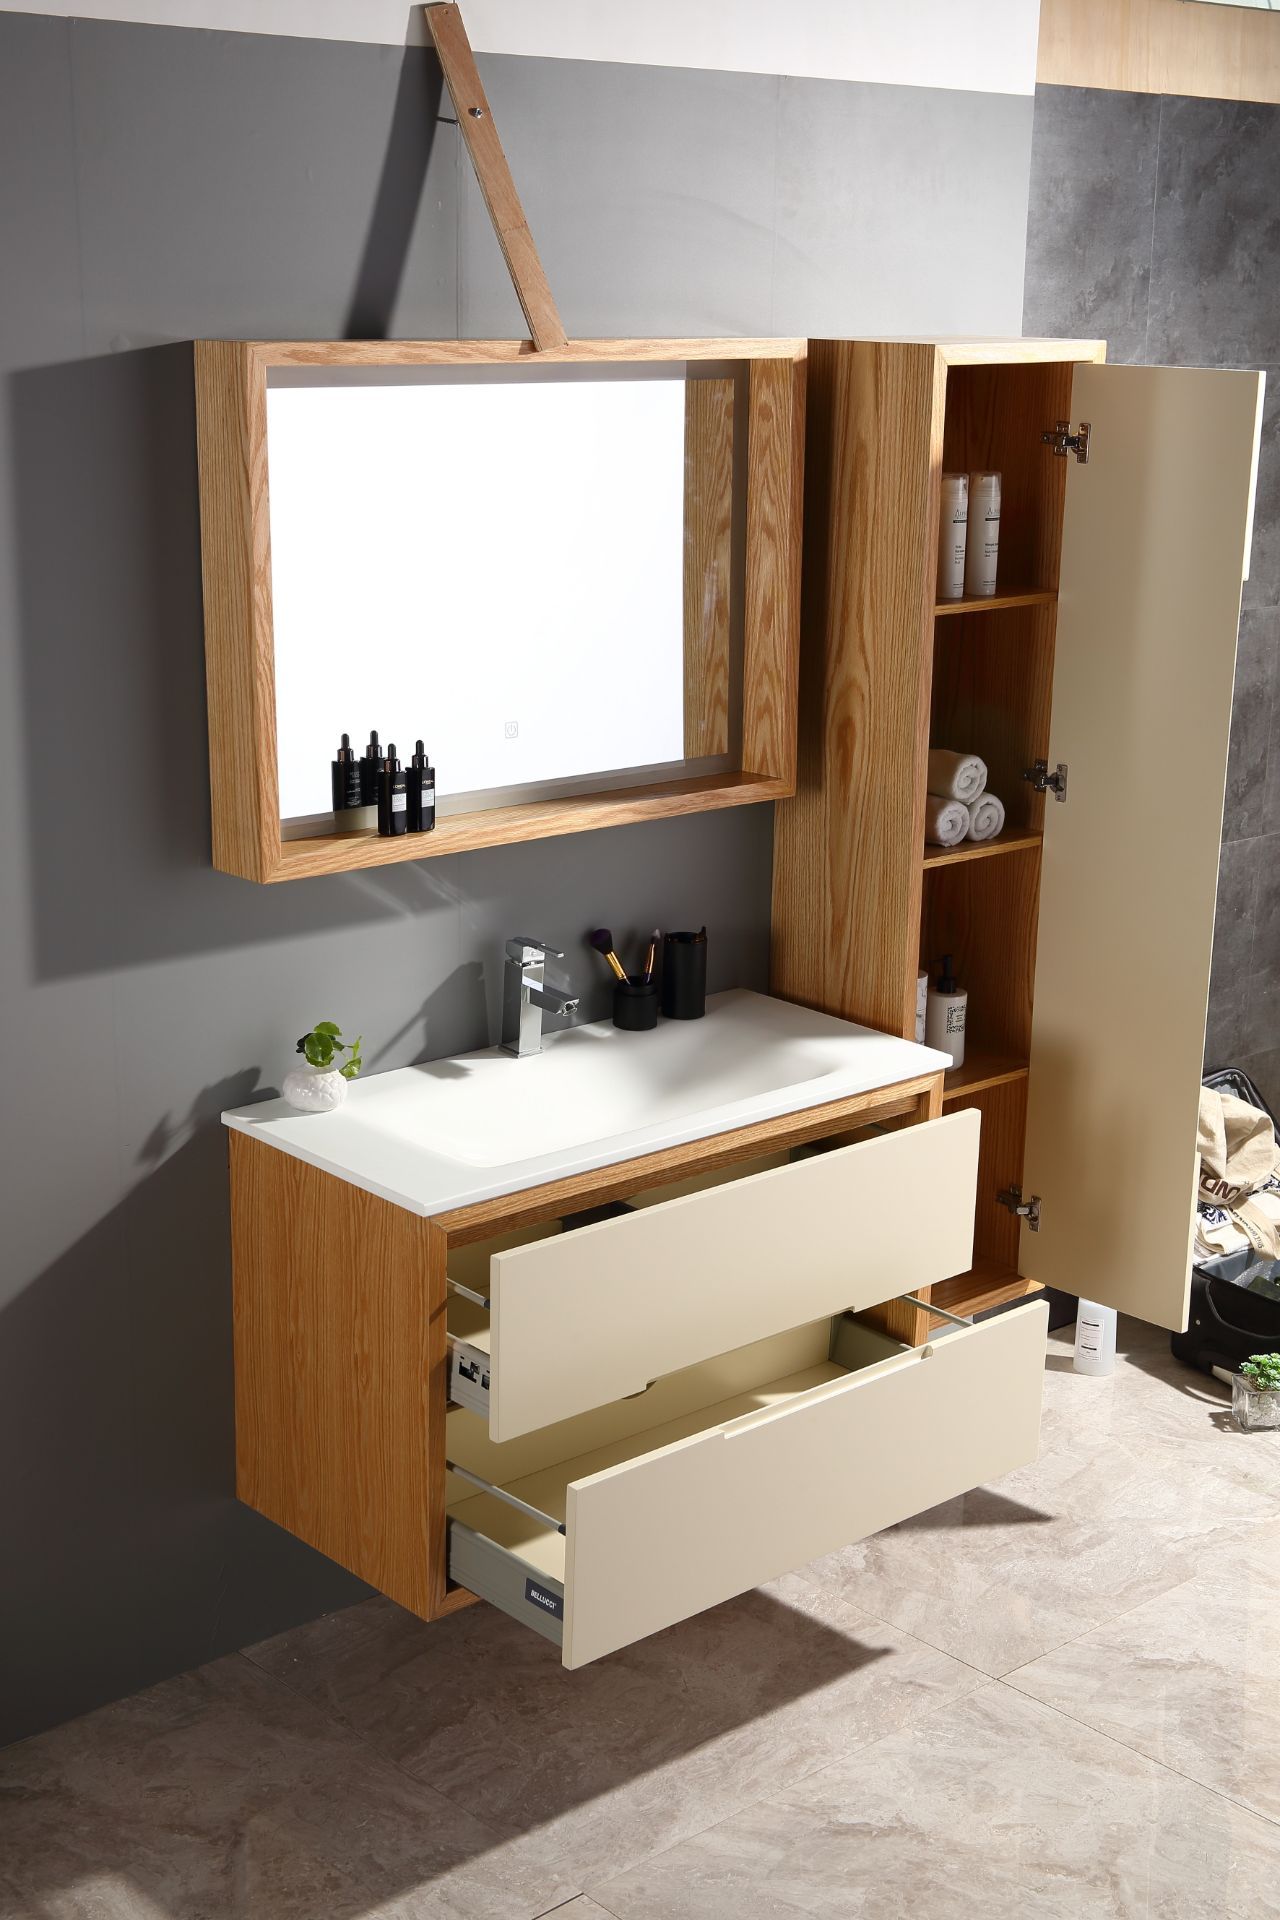 BRAND NEW Complete Vanity Unit Set in Beige with fixtures and fittings RRP £999.99 *NO VAT*